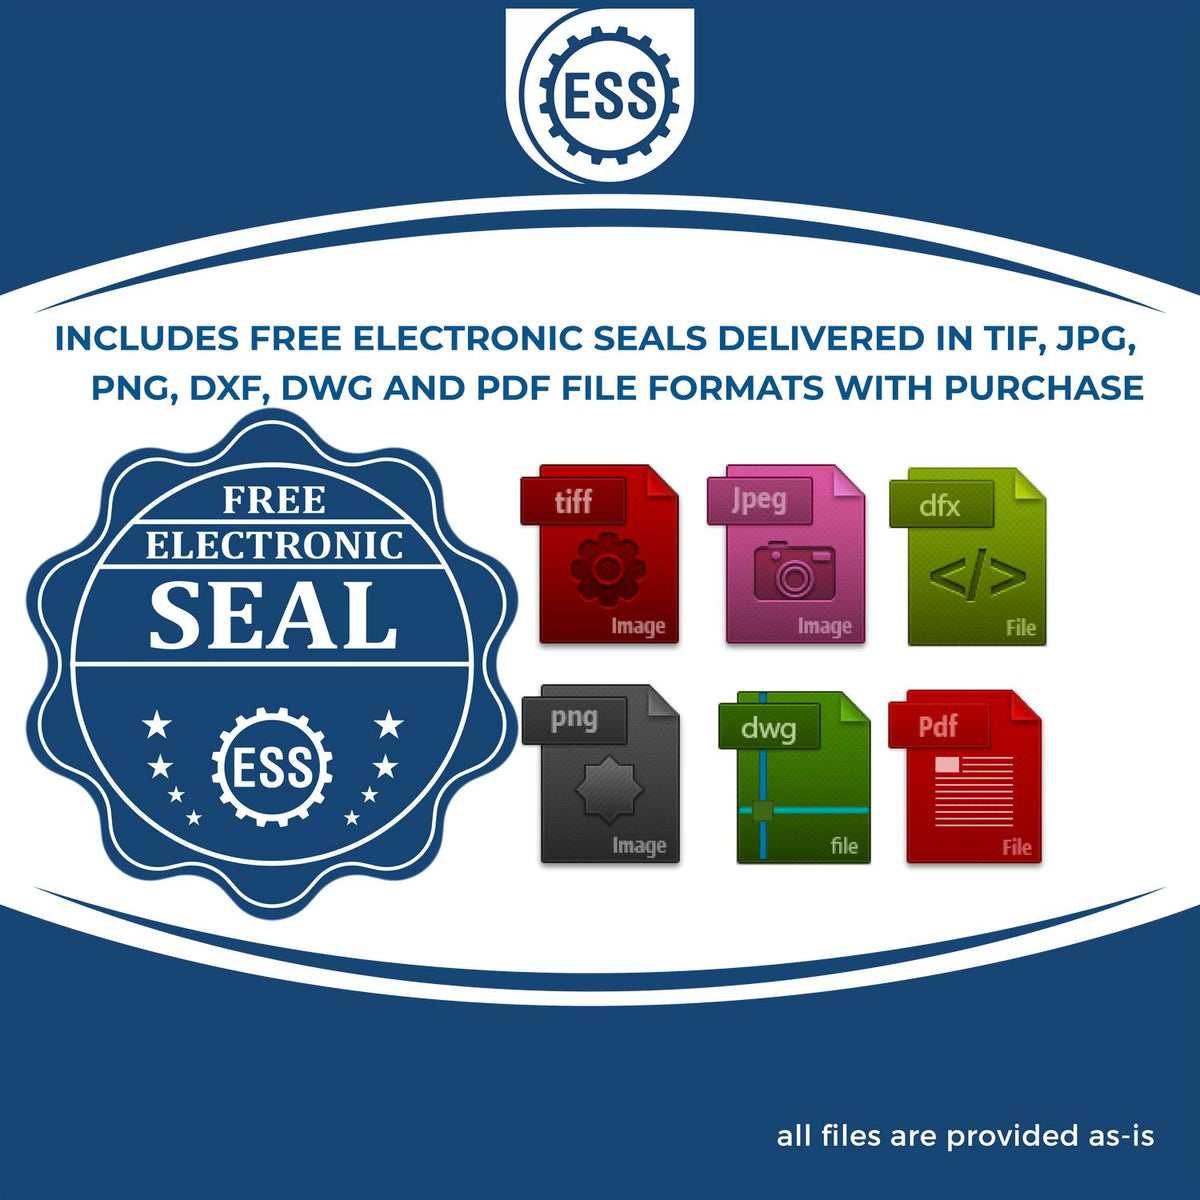 An infographic for the free electronic seal for the Long Reach Nevada Geology Seal illustrating the different file type icons such as DXF, DWG, TIF, JPG and PNG.